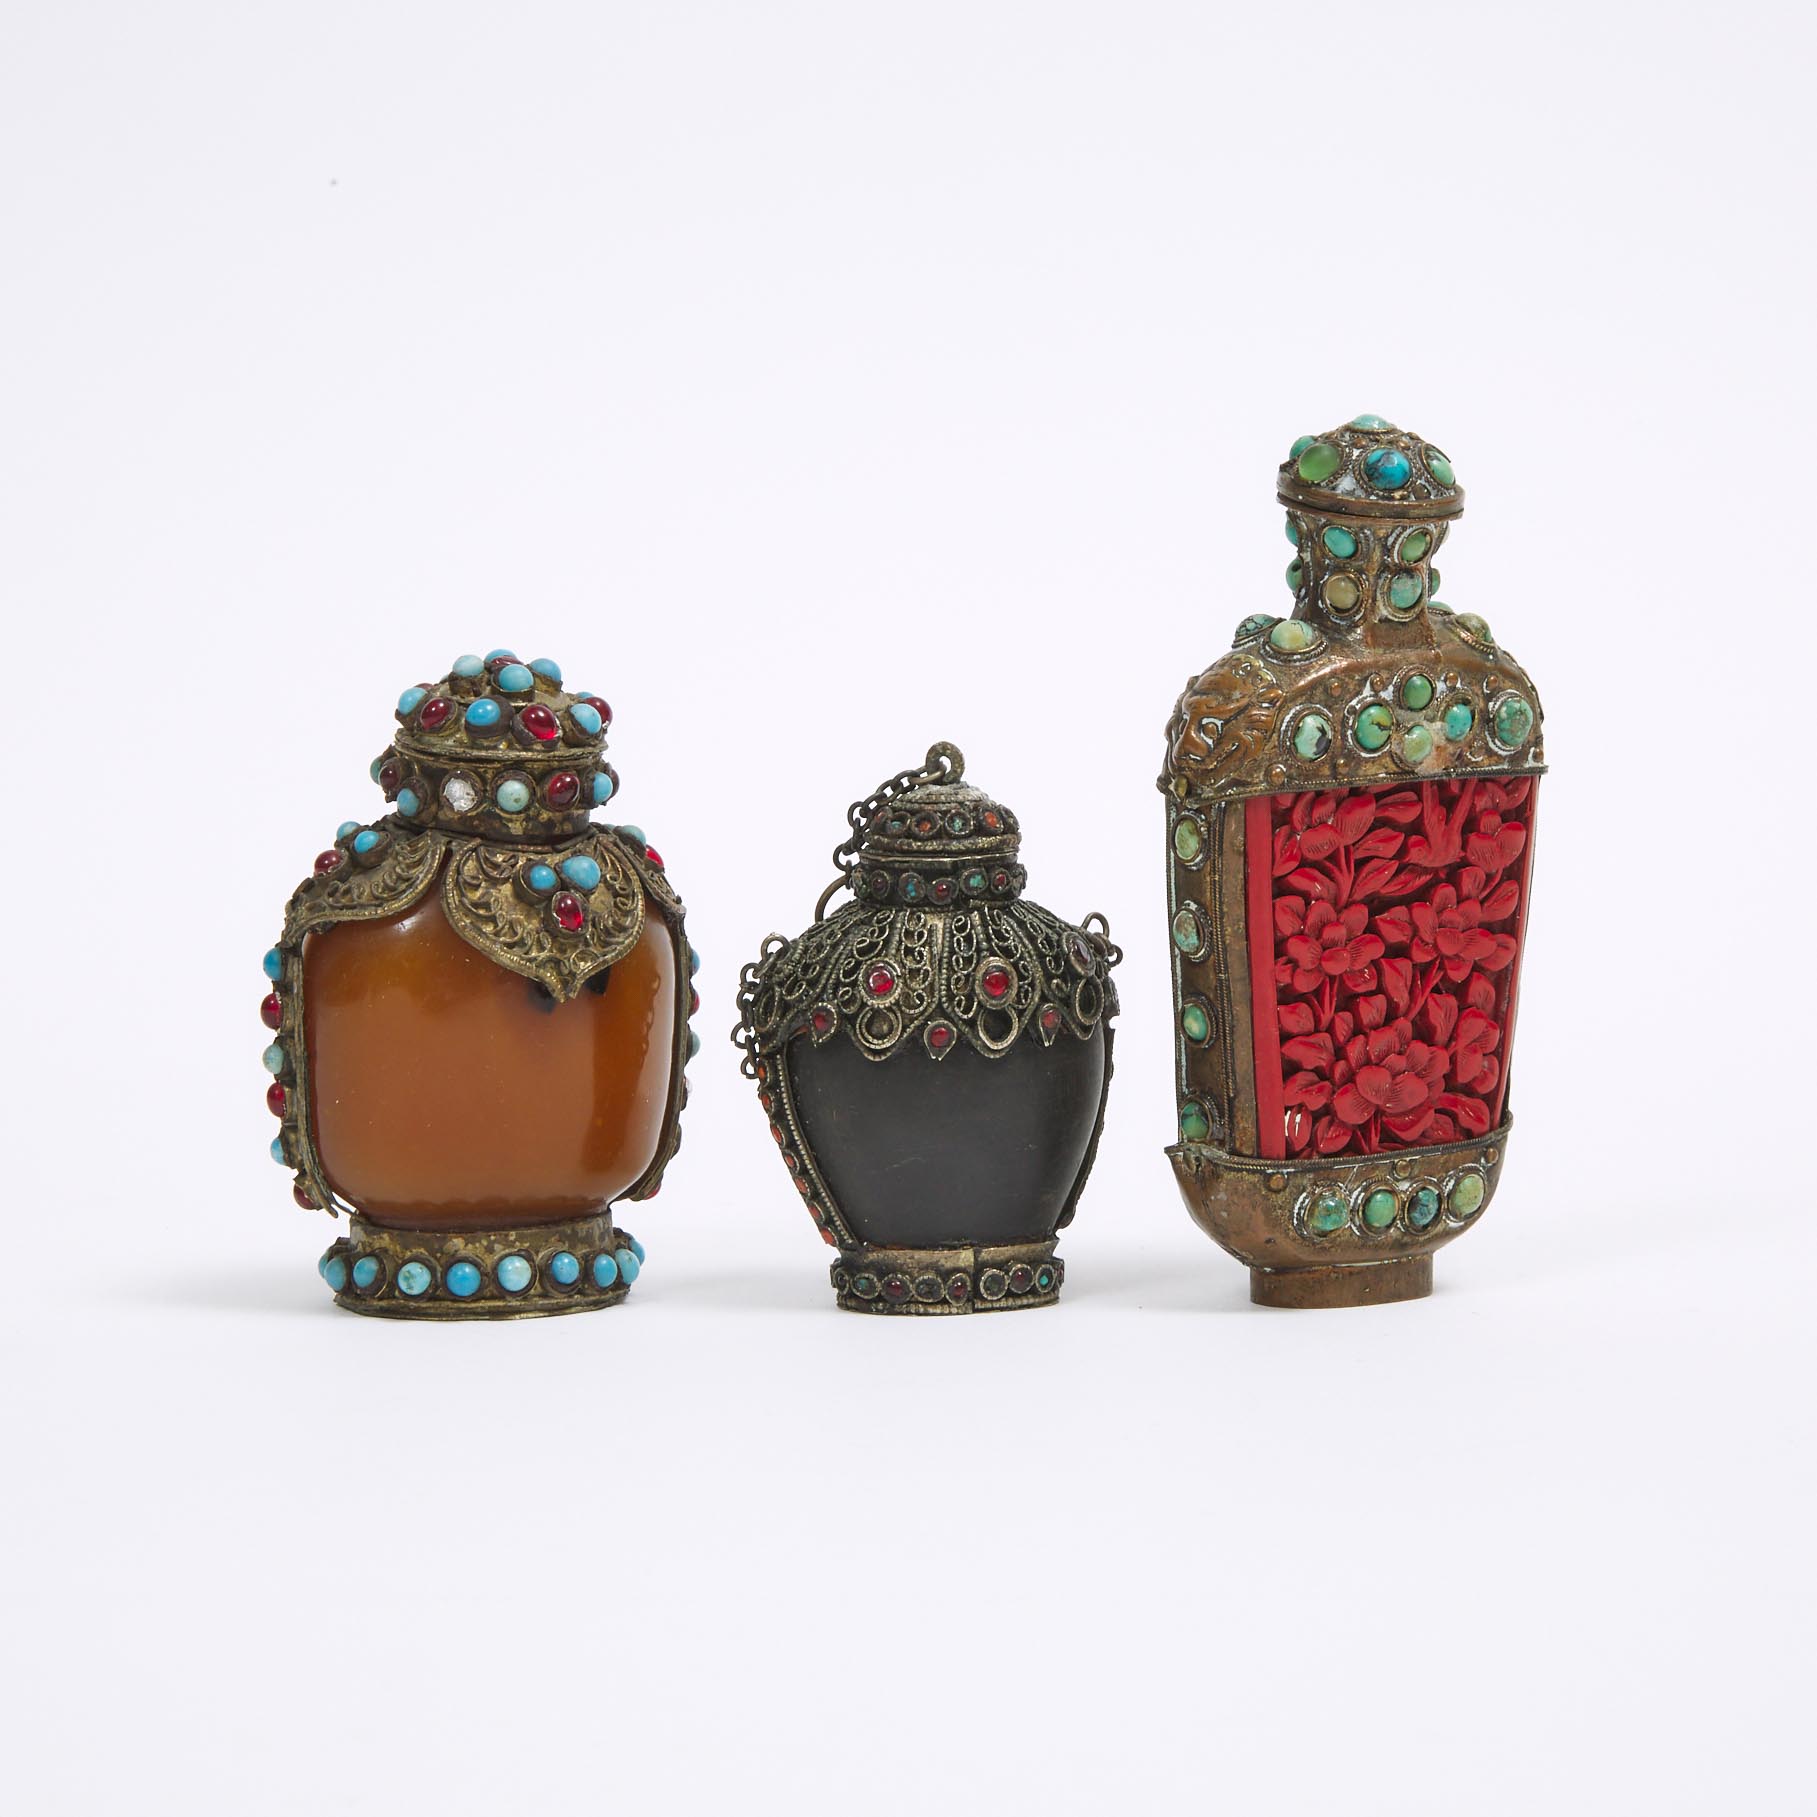 A Group of Three Metal-Mounted Snuff Bottles, Early 20th Century